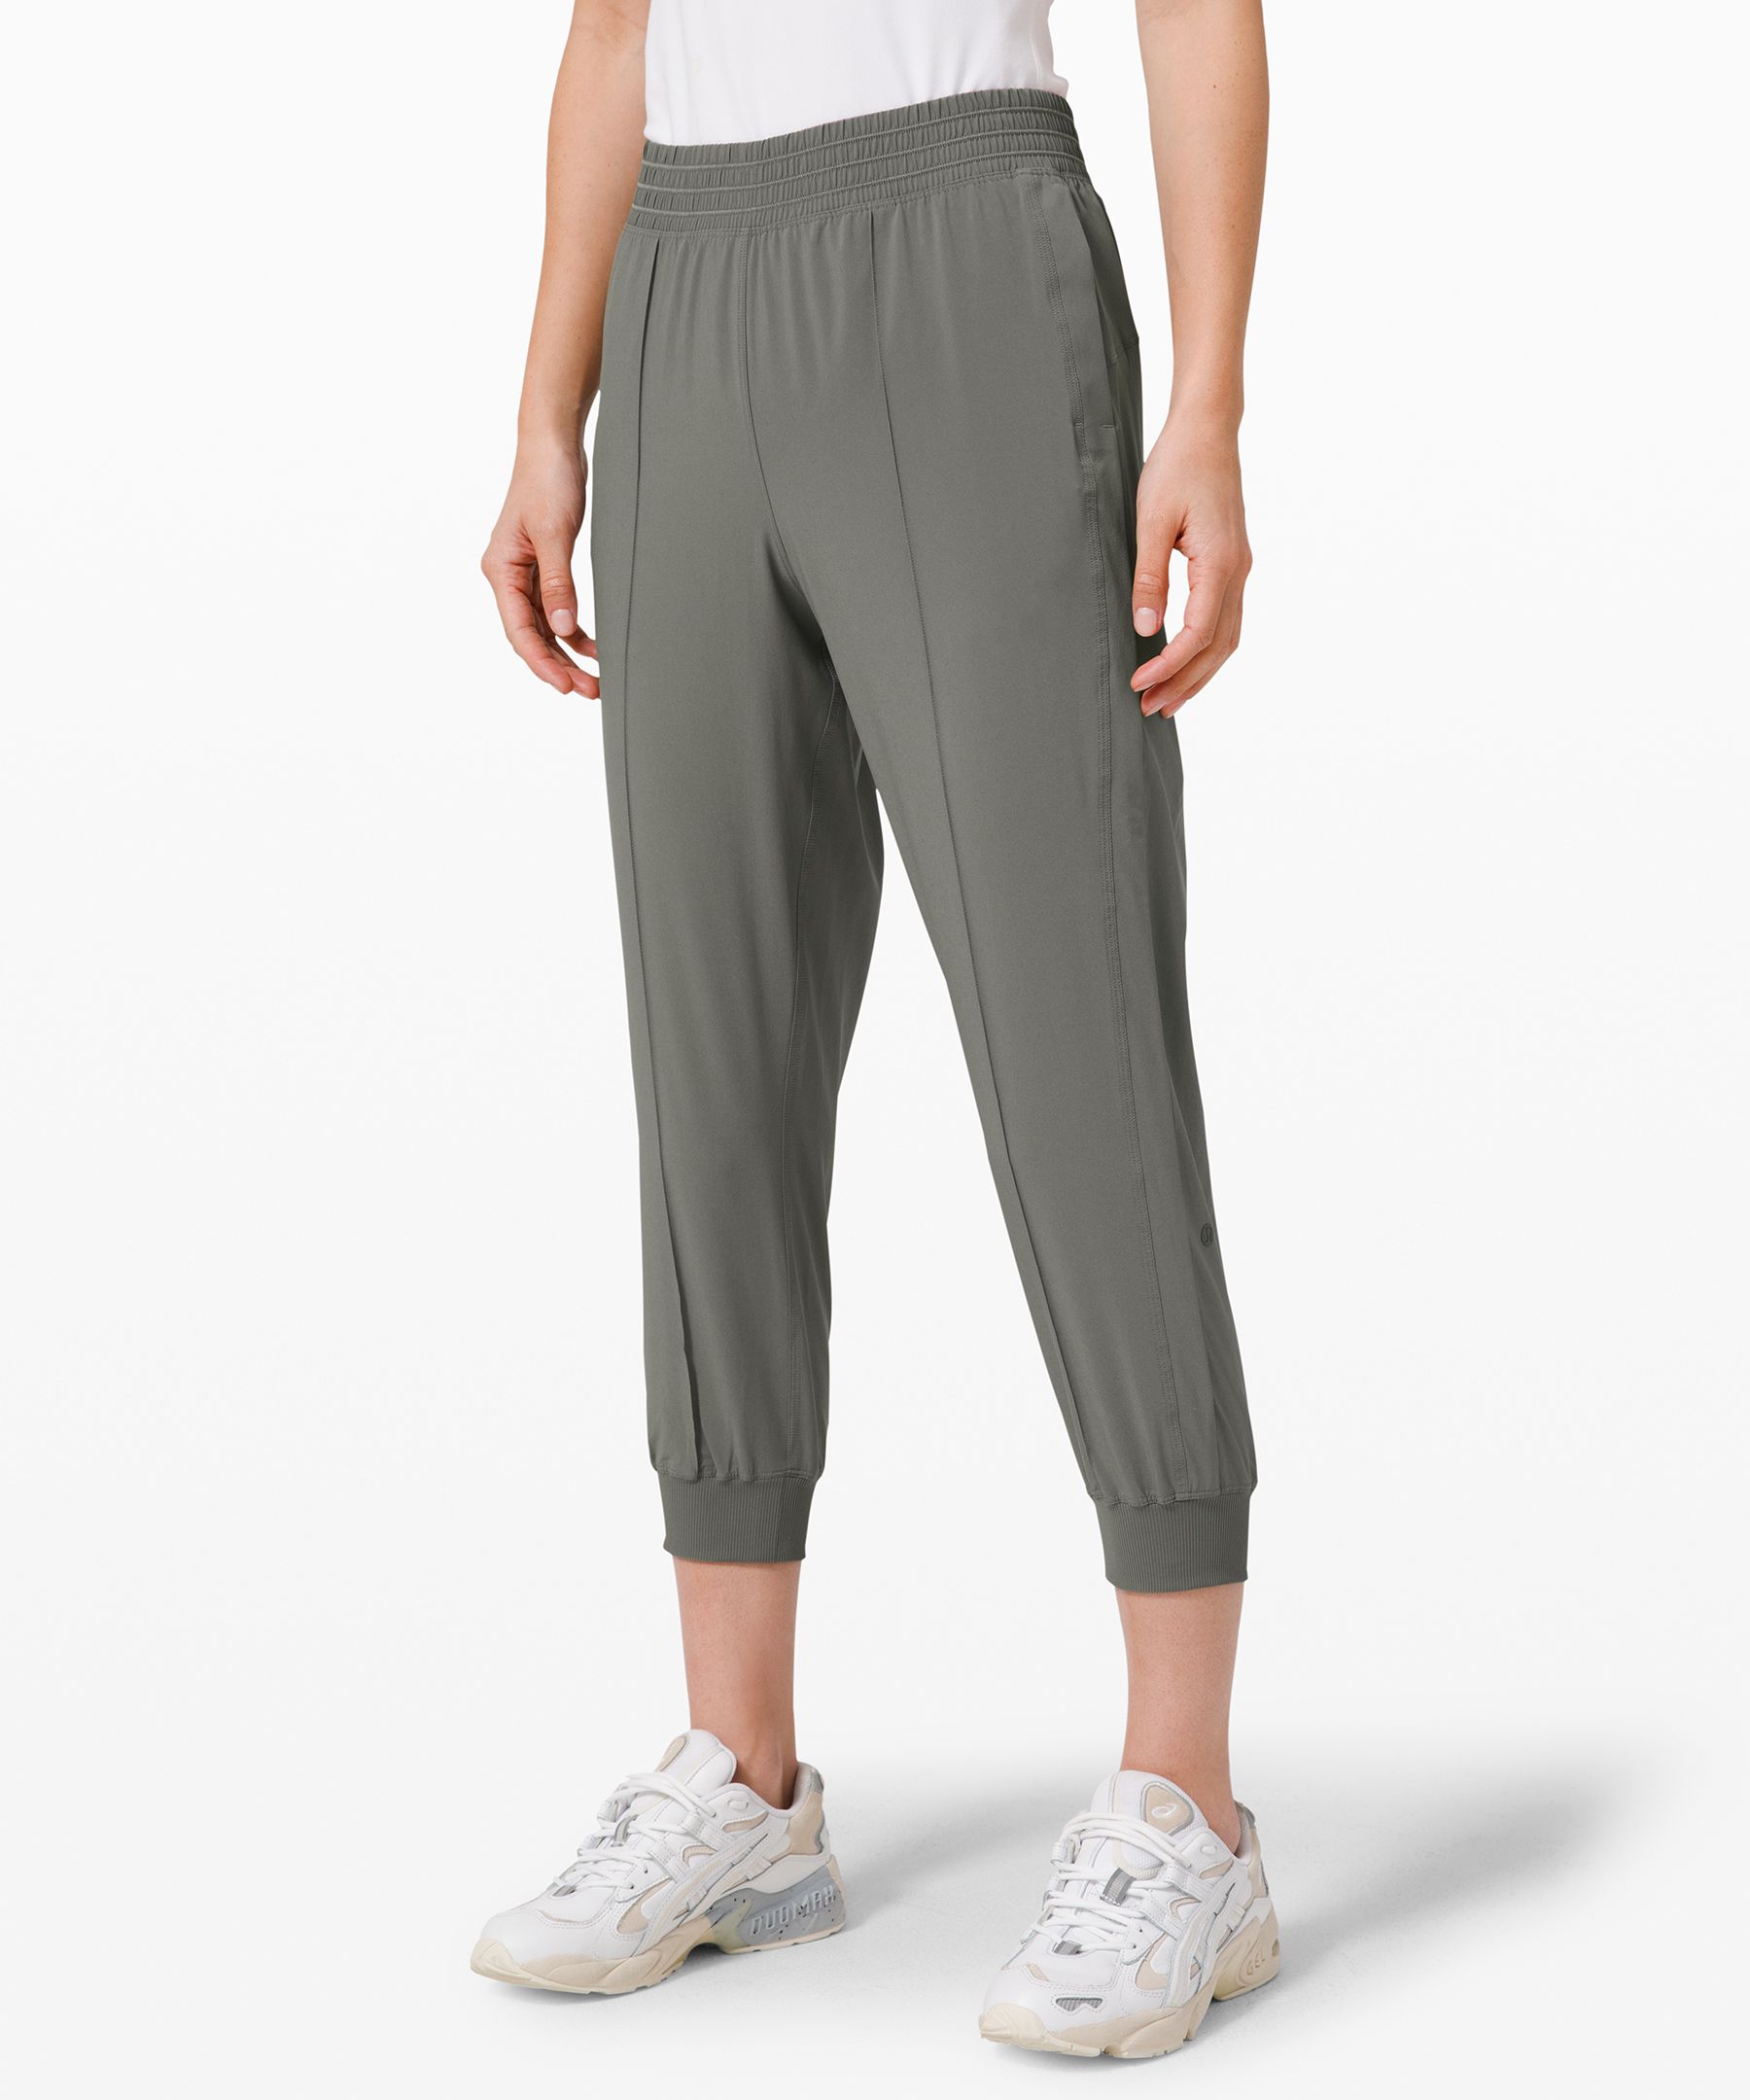 Just received - wanderer cropped jogger in black size 4 and all yours crew  in heathered ivory peach in size Xs - review in comments : r/lululemon